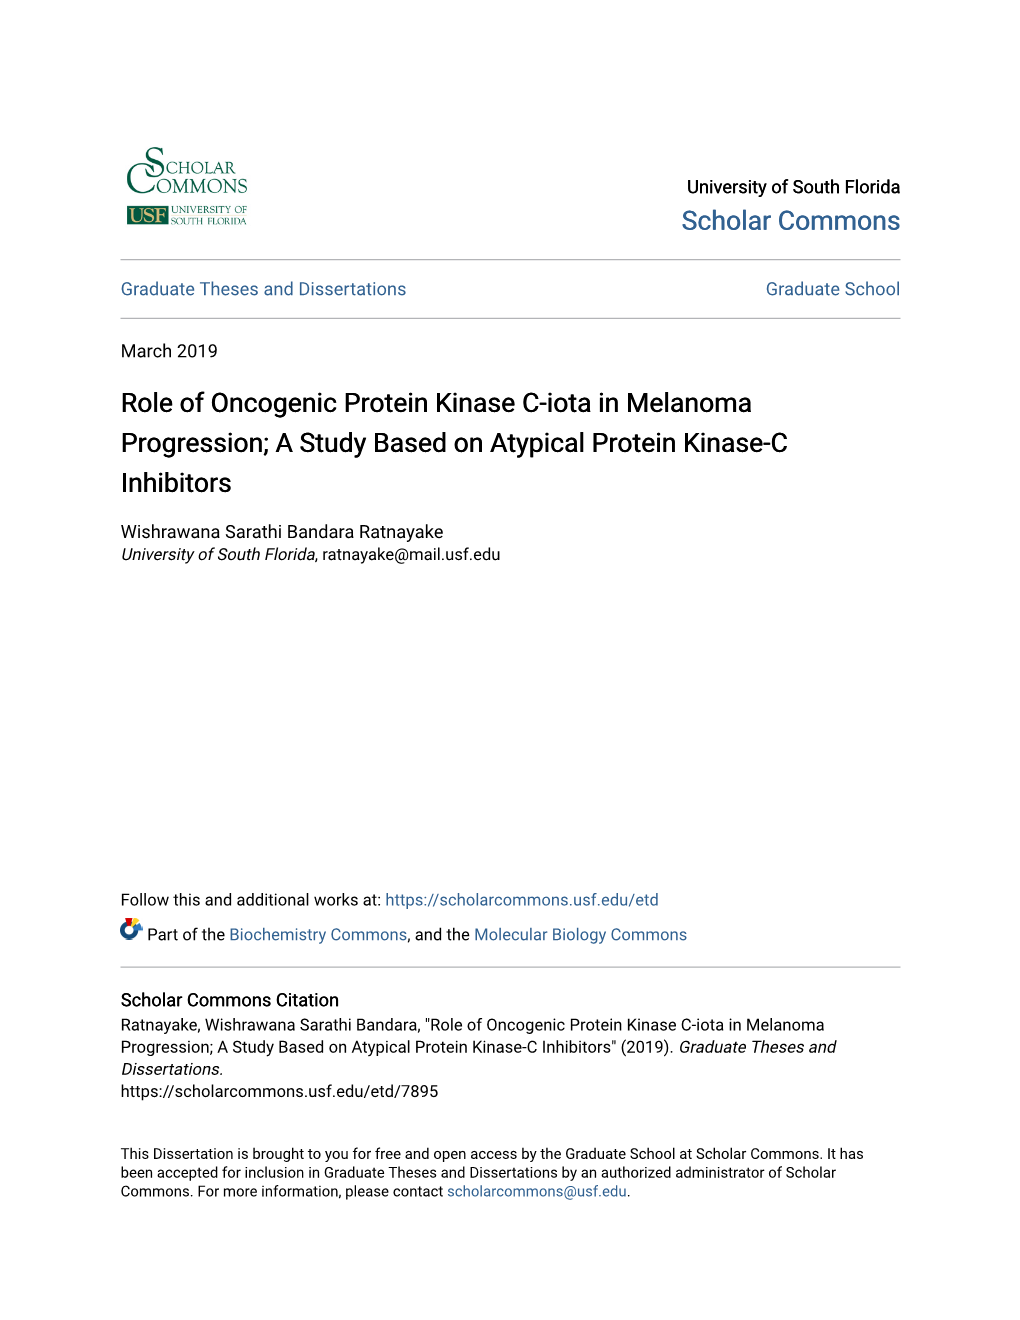 Role of Oncogenic Protein Kinase C-Iota in Melanoma Progression; a Study Based on Atypical Protein Kinase-C Inhibitors